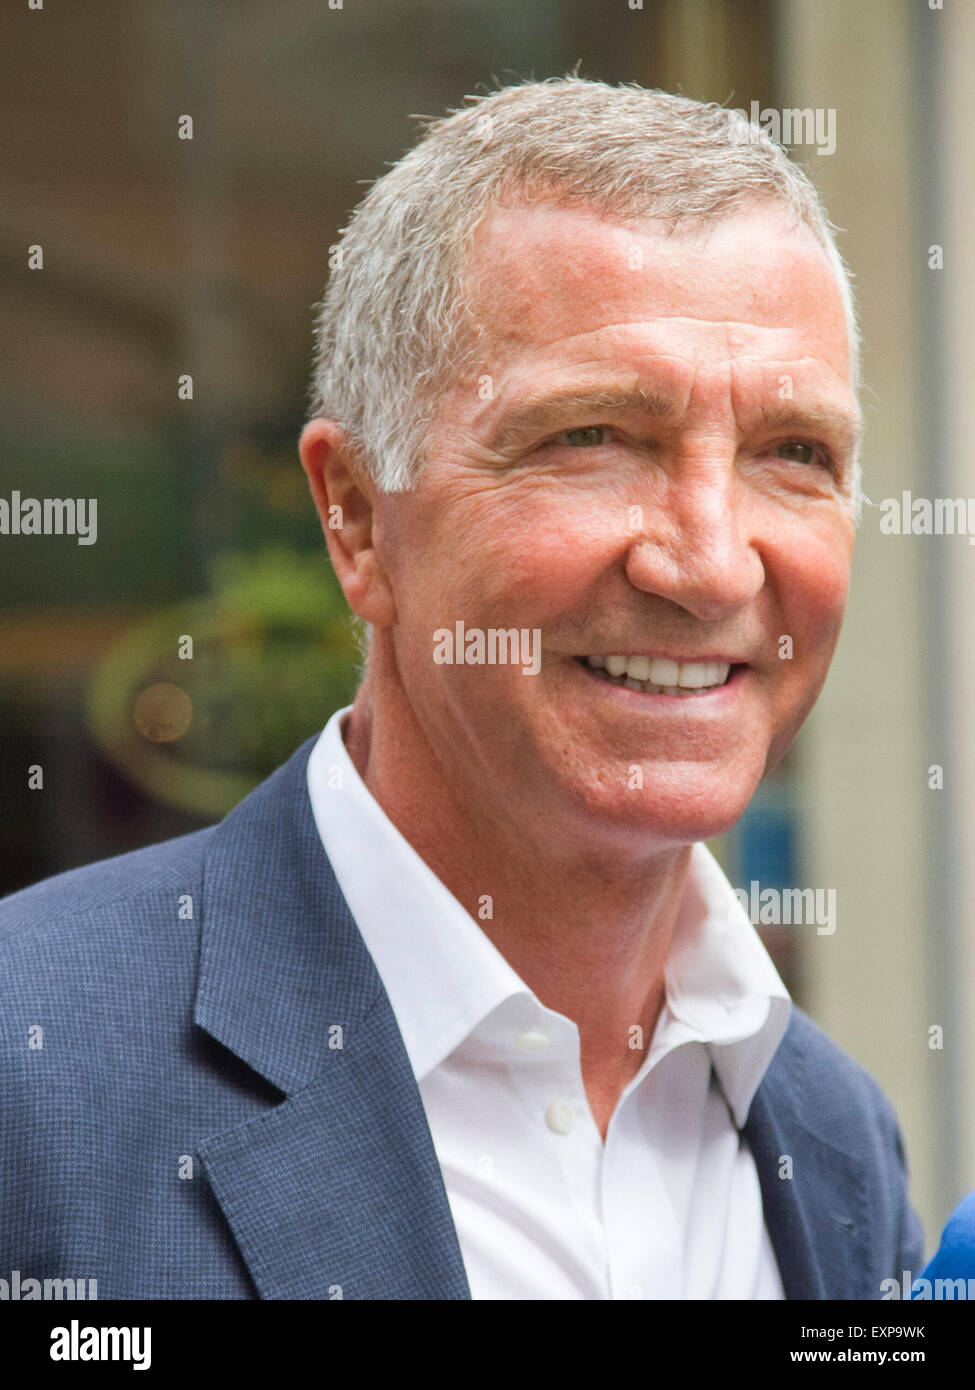 London UK. 16th July 2015. Former Liverpool FC and Glasgow Rangers manager Graeme Souness shopping outside Harrods Knightsbridge Credit:  amer ghazzal/Alamy Live News Stock Photo